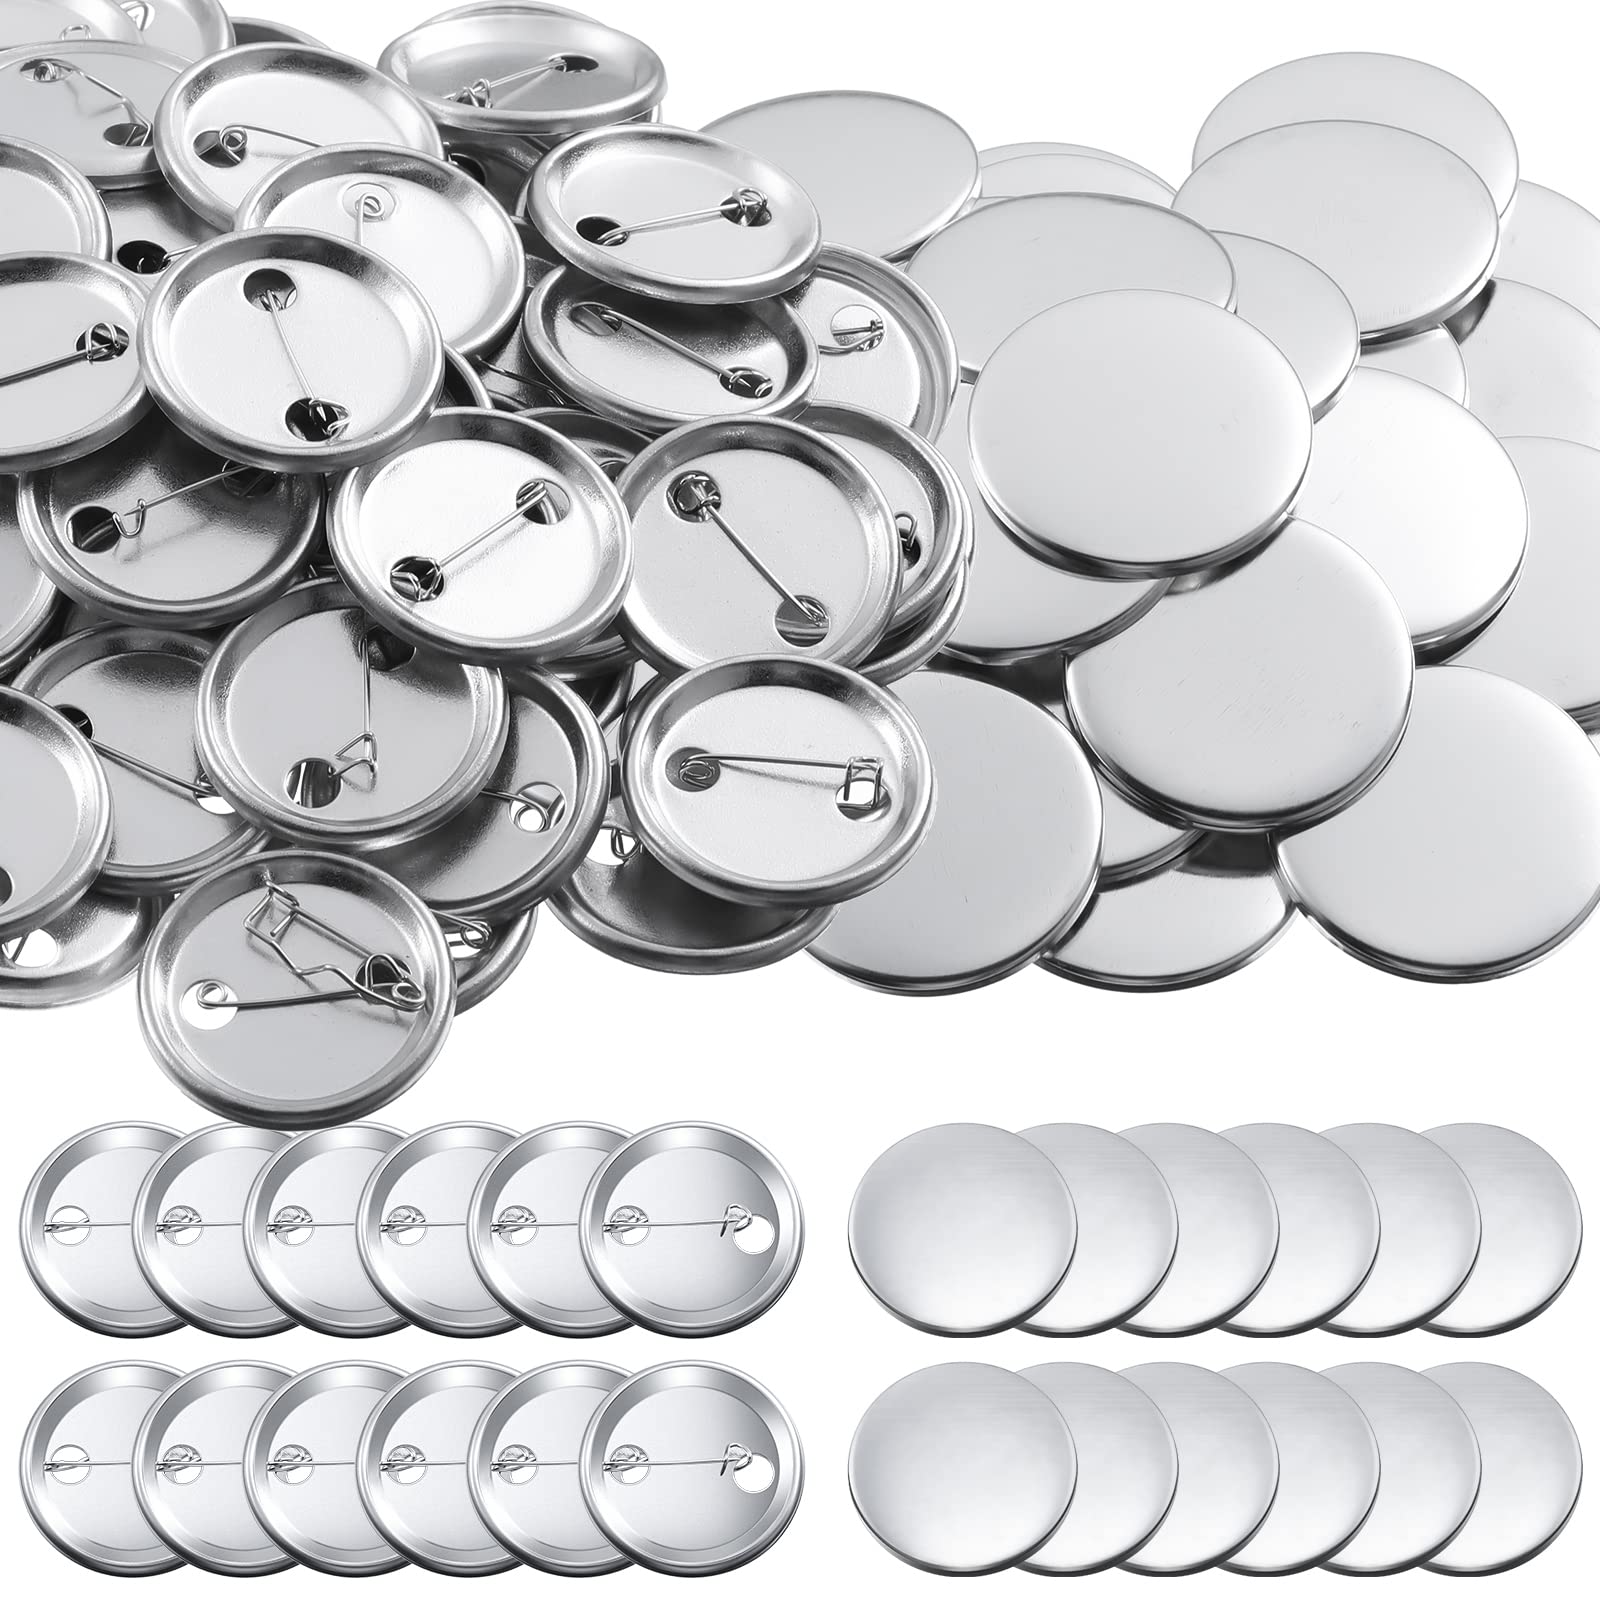 HTVRONT Blank Button Making Supplies - 100 Pcs Metal Button Pins for Button Maker Machine, 58mm Round Badge Making Supplies with Plastic Shell Back